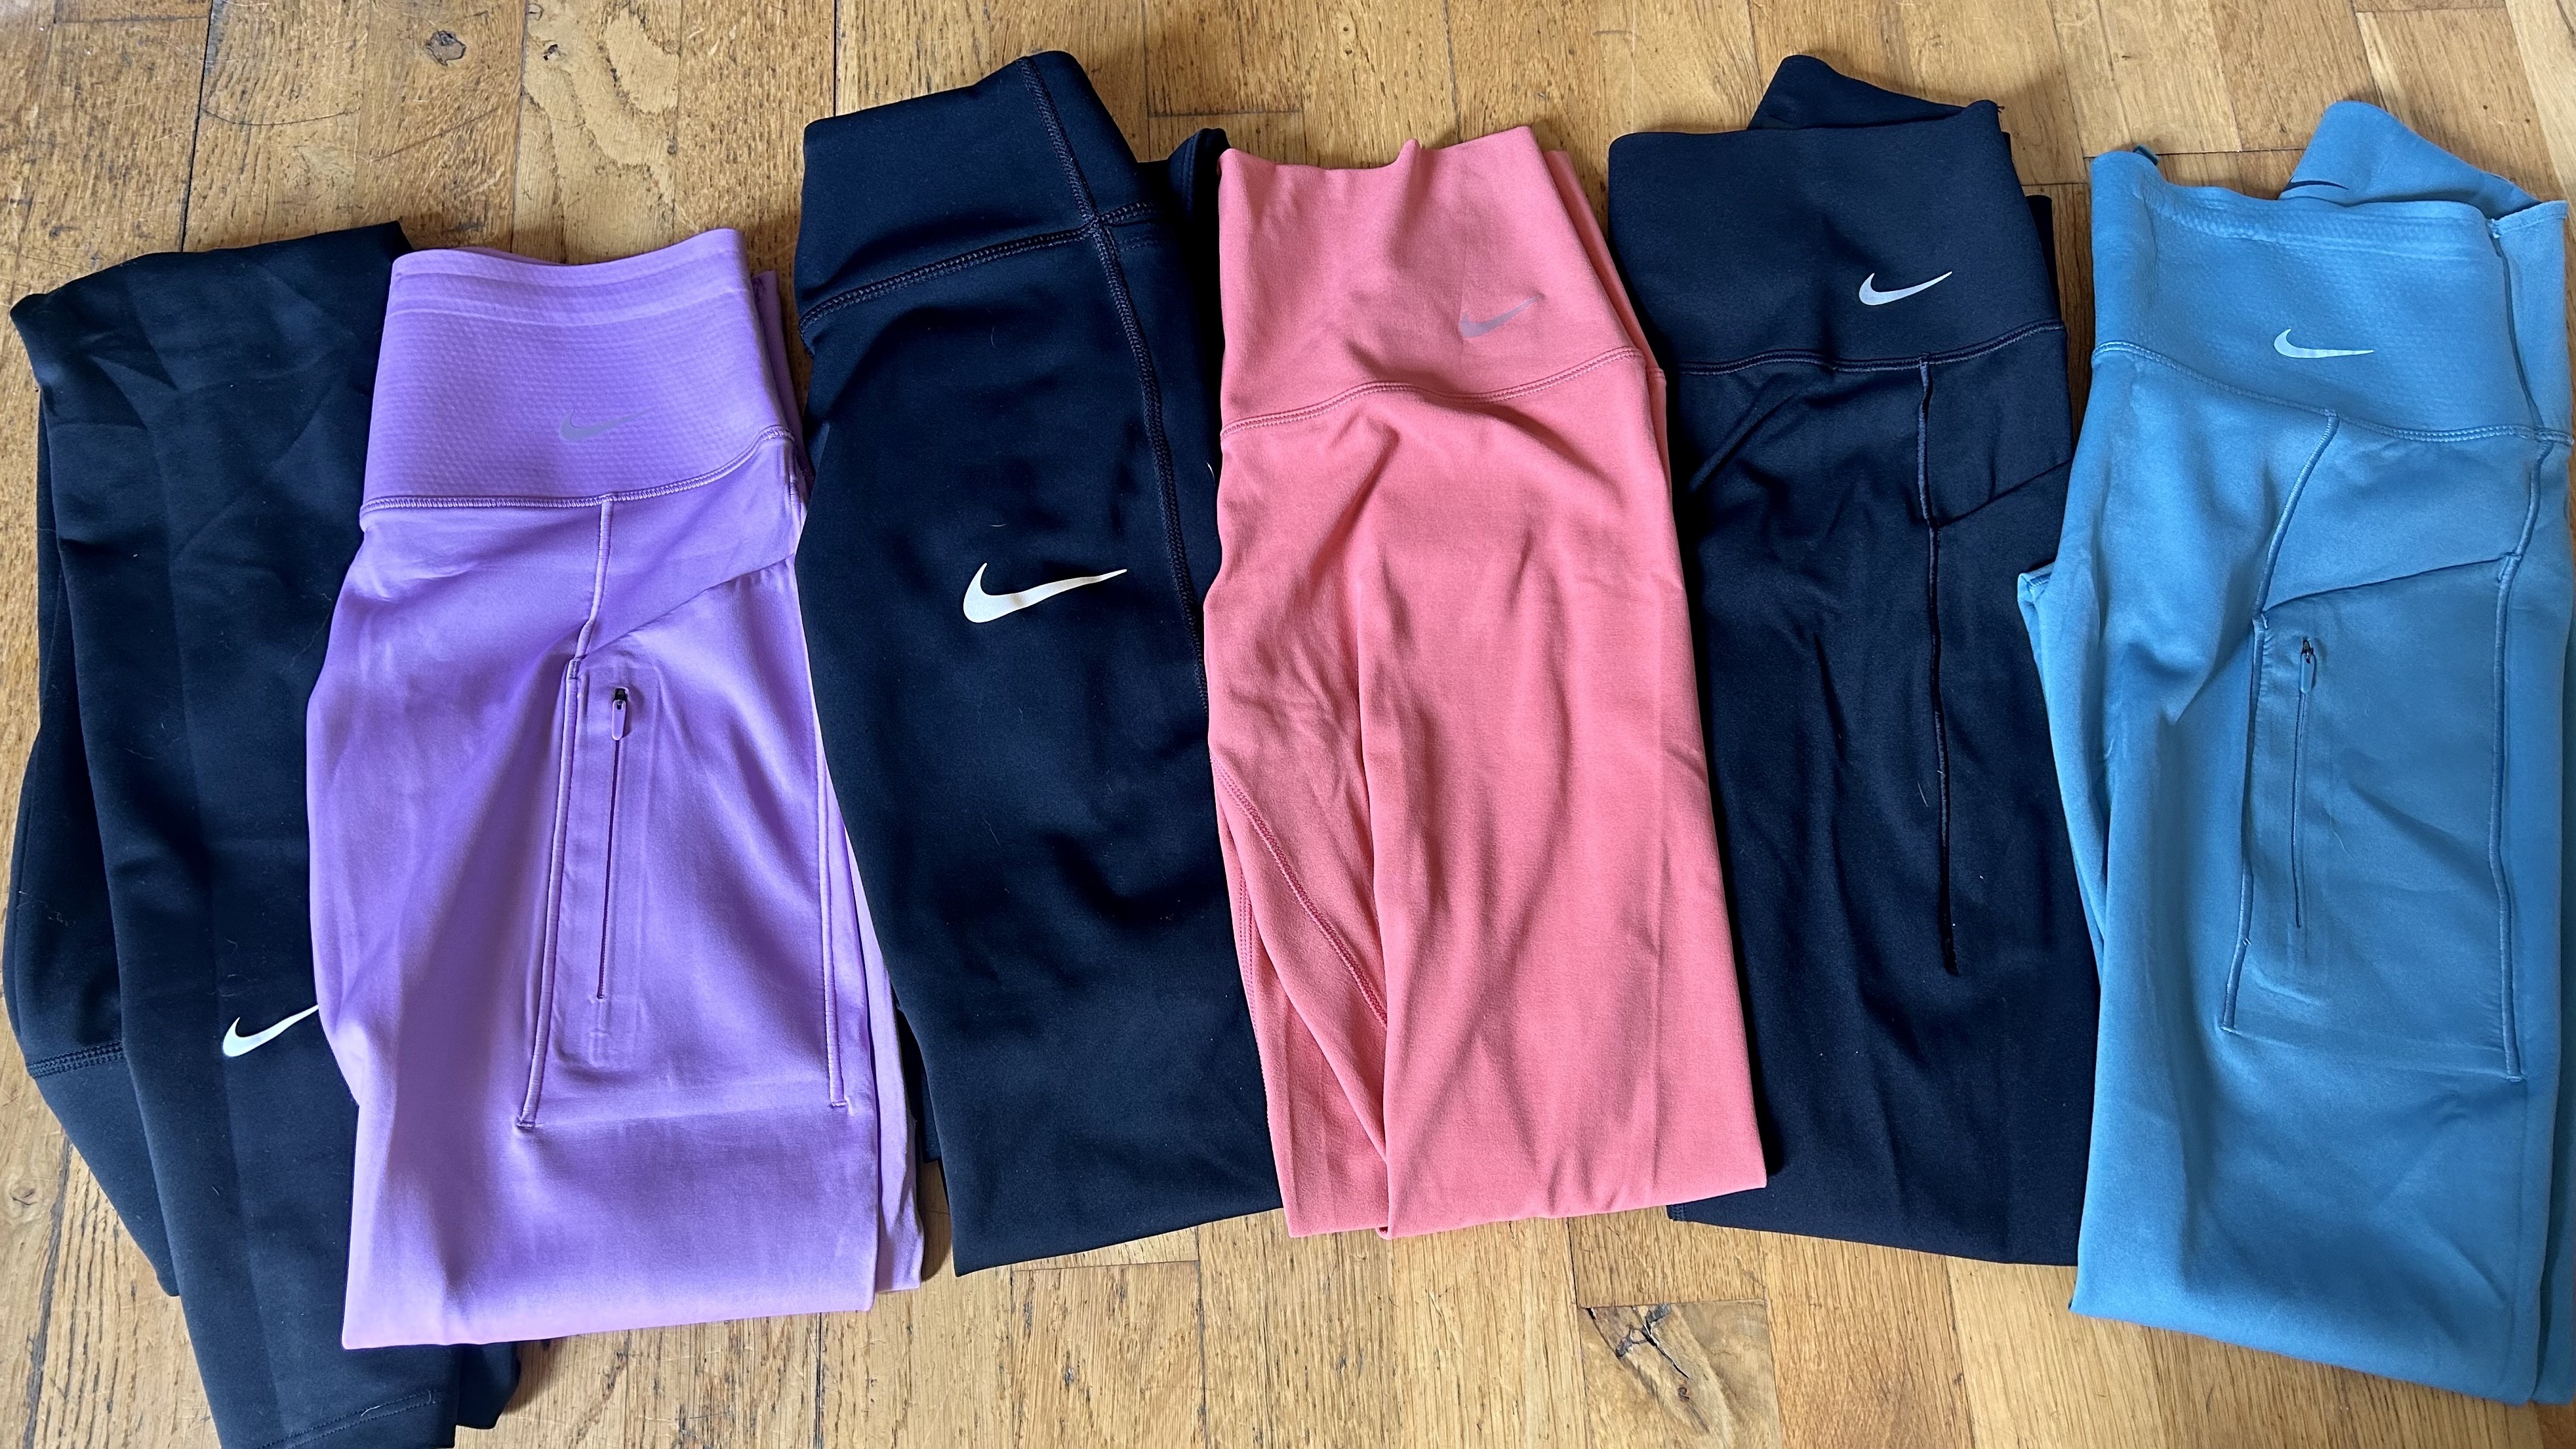 I've Tested Every Pair Of Nike Leggings And These Are The Best For Running